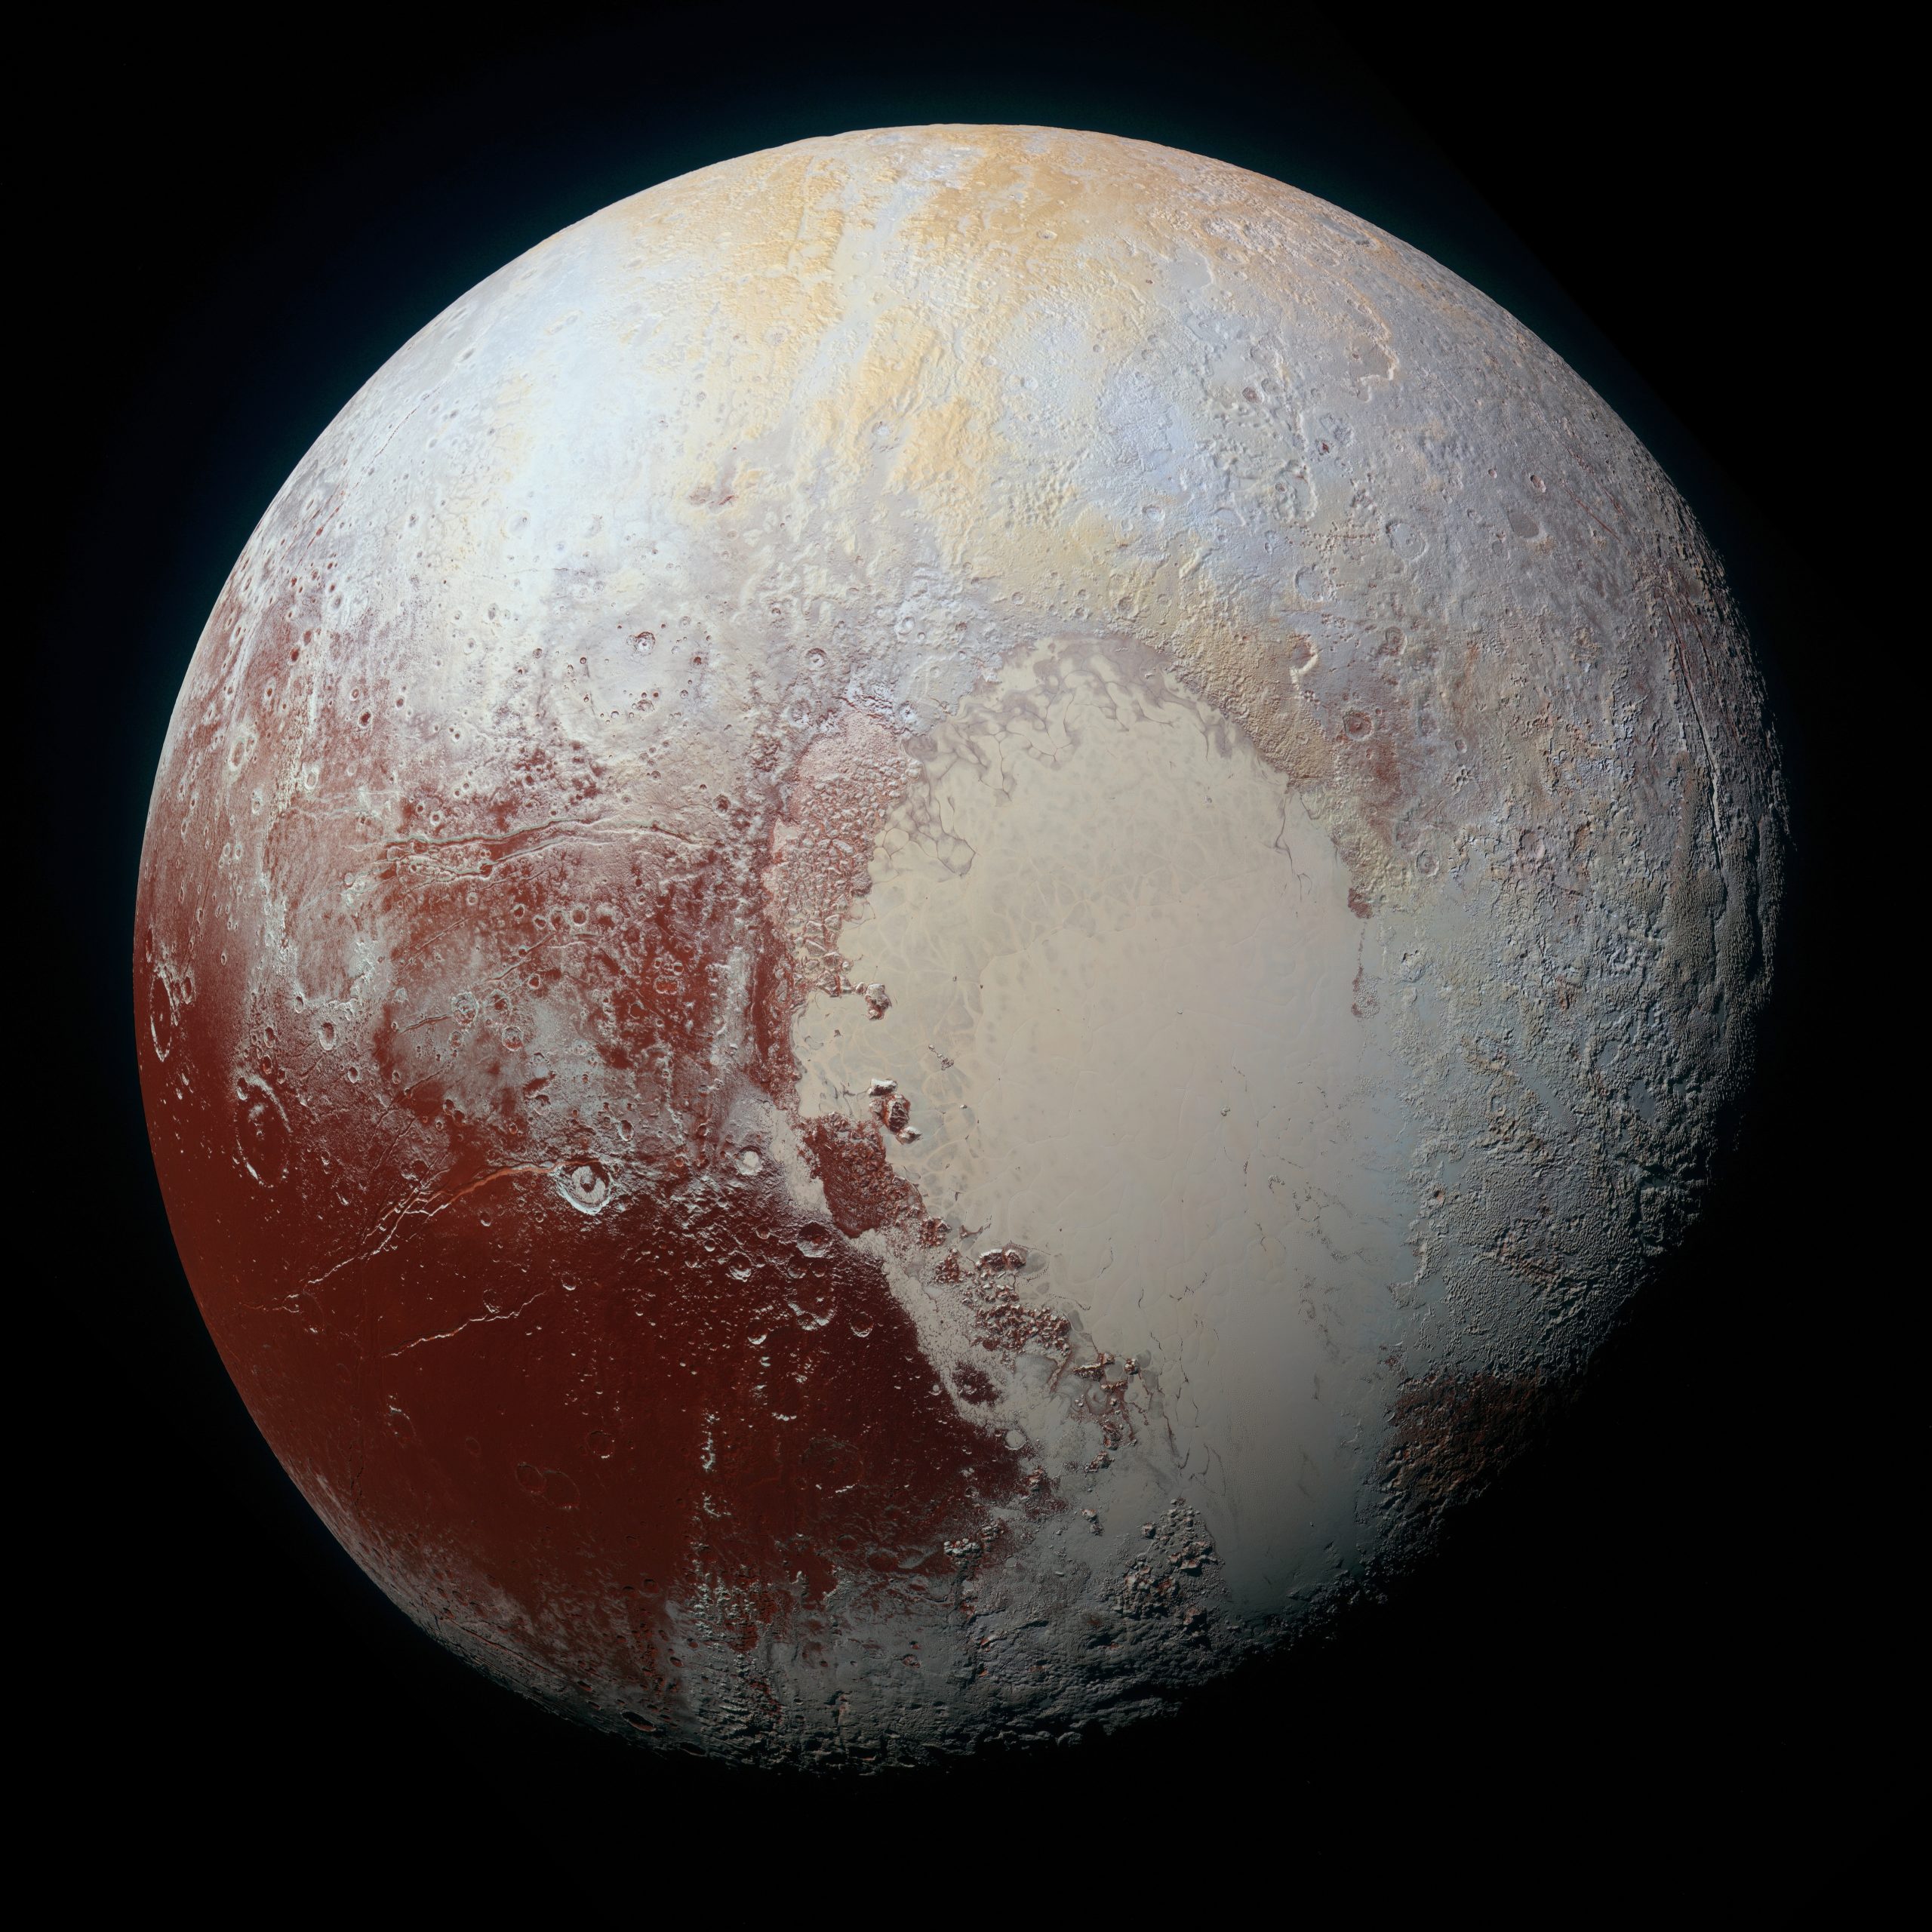 Image of the surface of Pluto. In this photograph, the smooth, white Sputnik plains are seen covering most of the upper right of the image. Rugged, heavily cratered terrain covers the lower center and upper left.